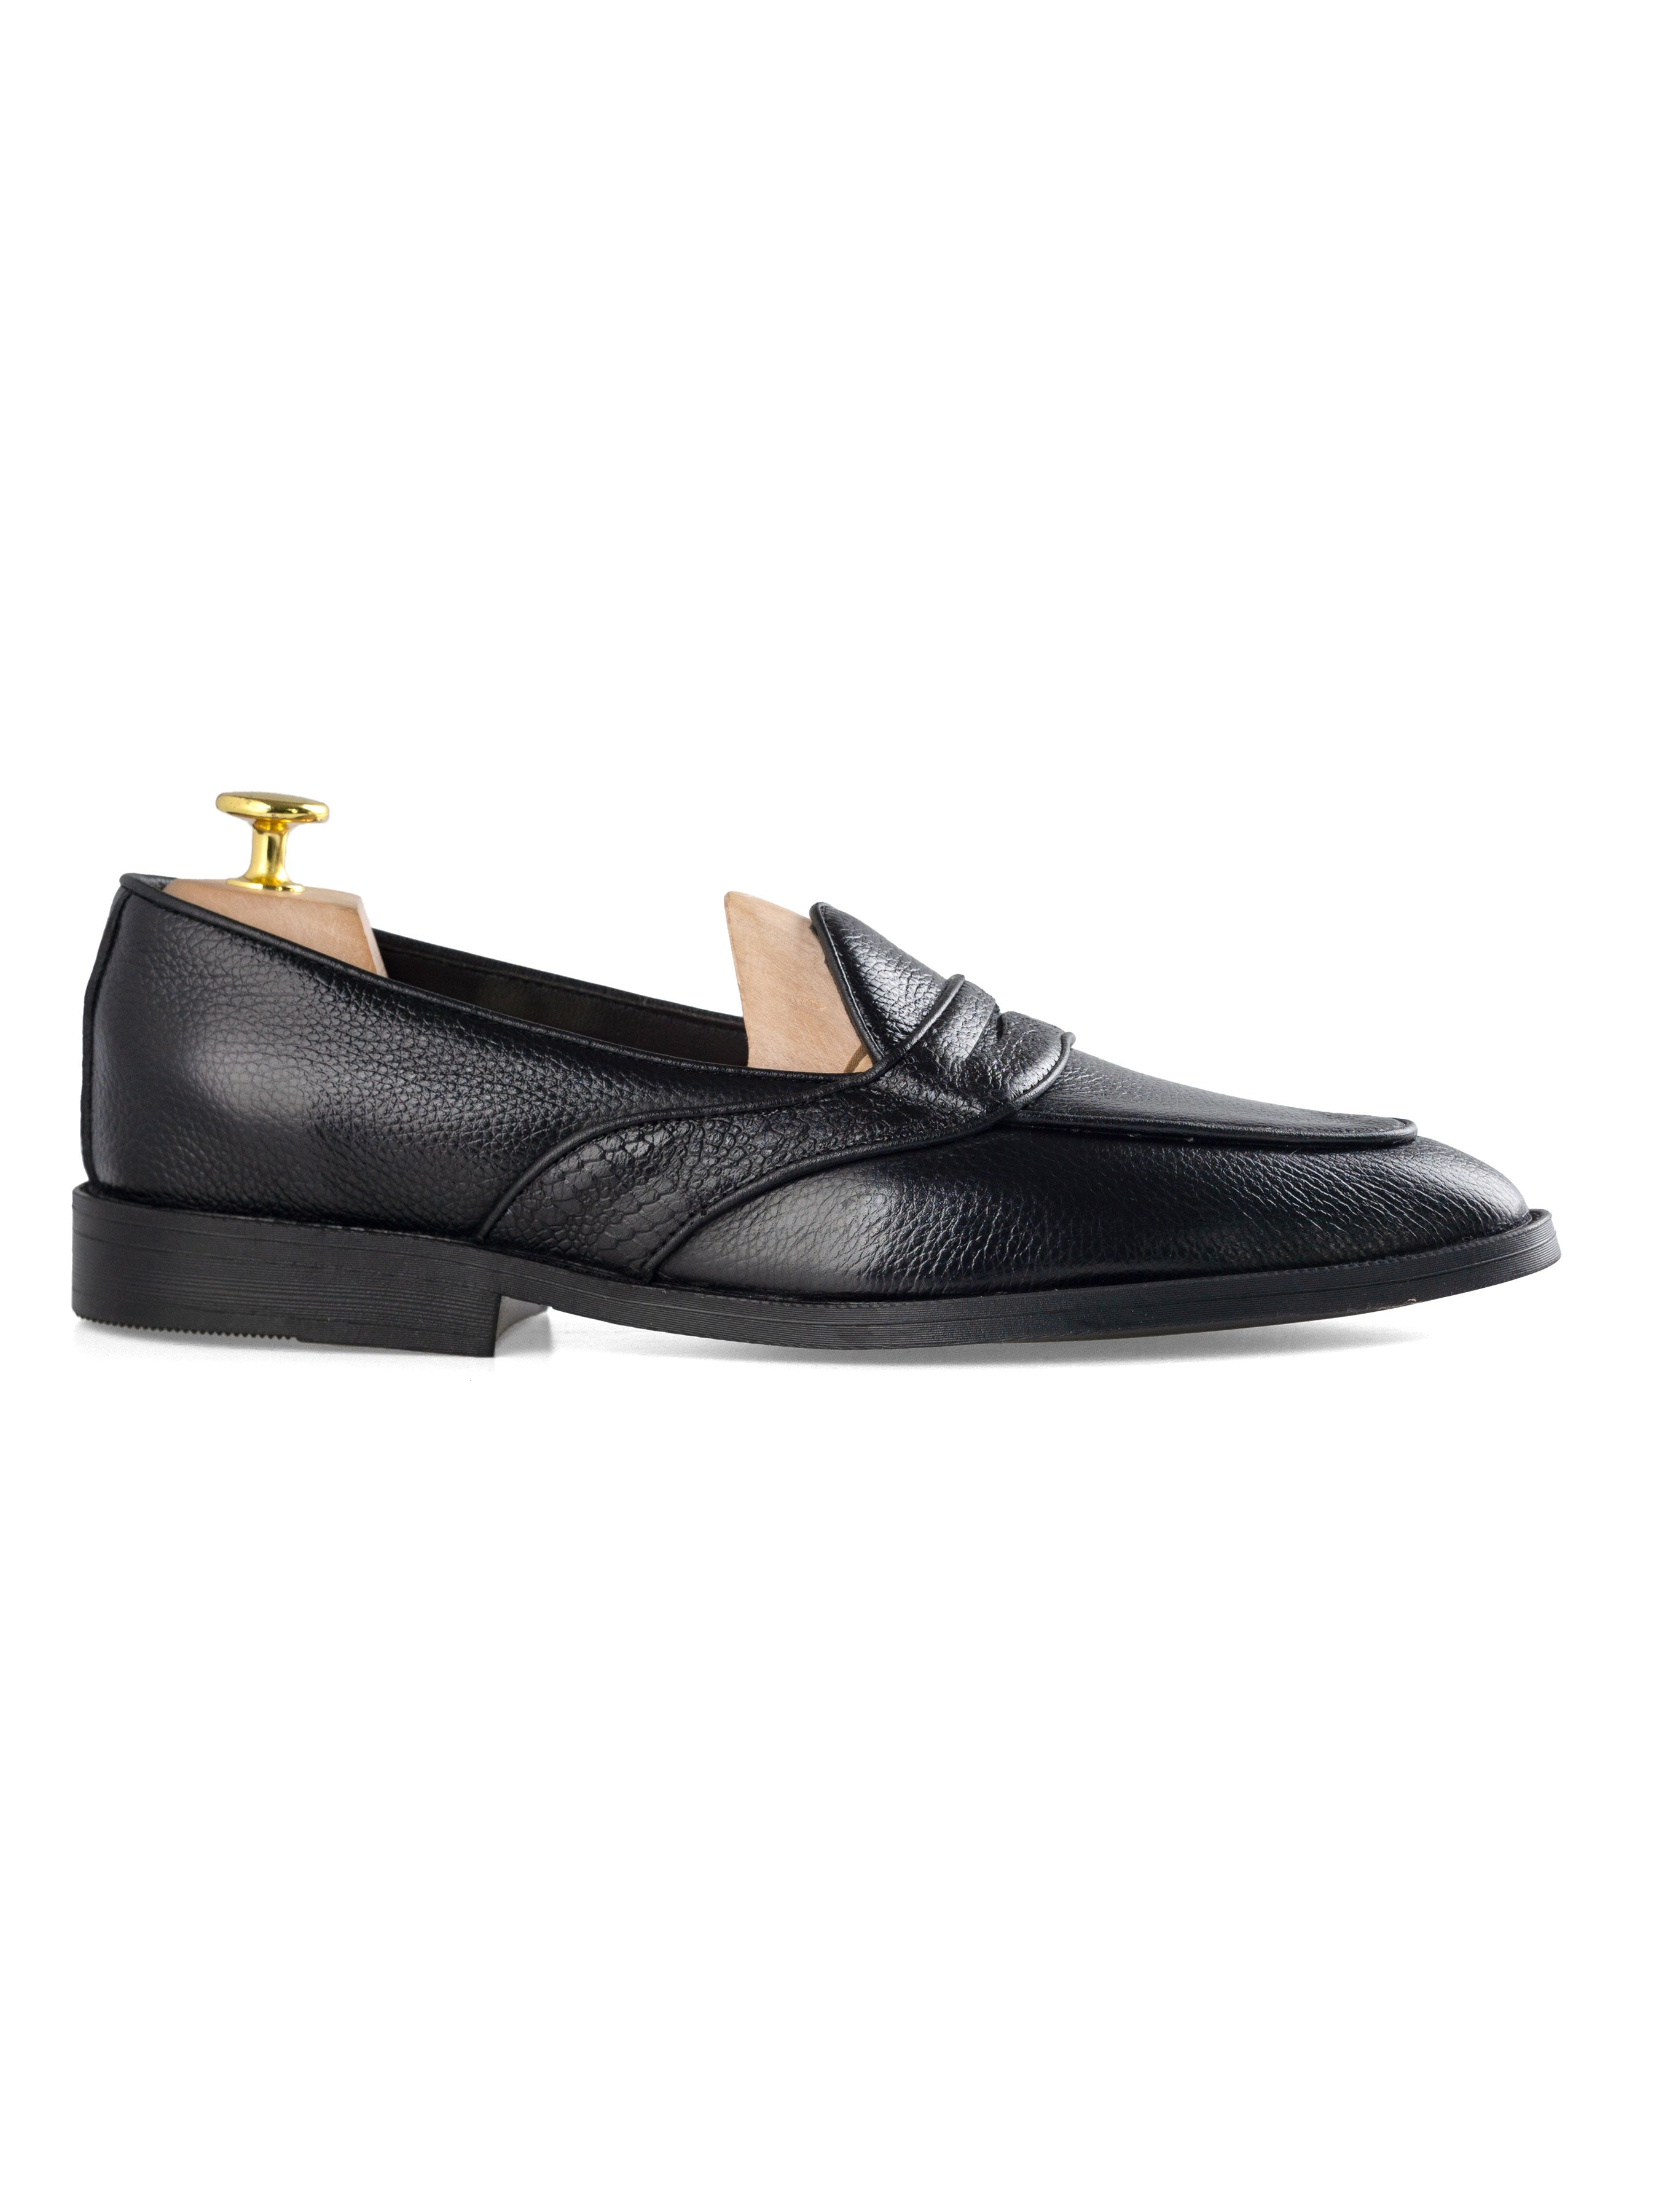 Belgian Loafer with Penny - Black Pebble Grain Leather (Phyton Embossed Strap)